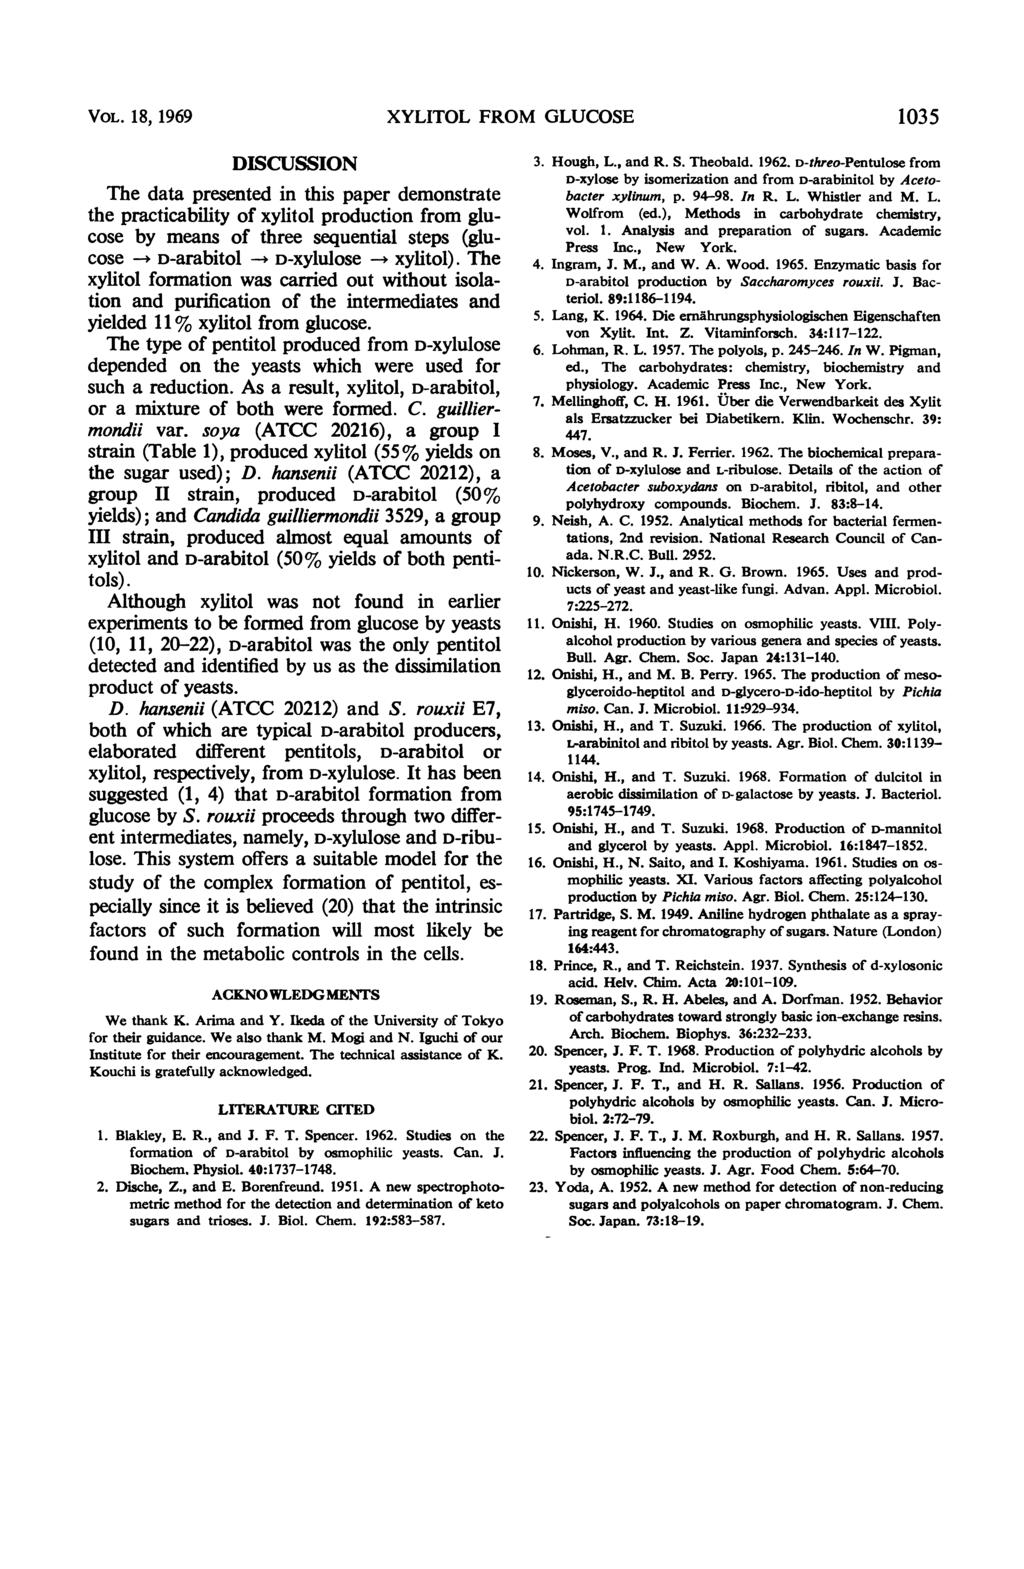 VOL. 18, 1969 XYLITOL FROM GLUCOSE 1035 DISCUSSION The data presented in this paper demonstrate the practicability of xylitol production from glucose by means of three sequential steps (glucose --